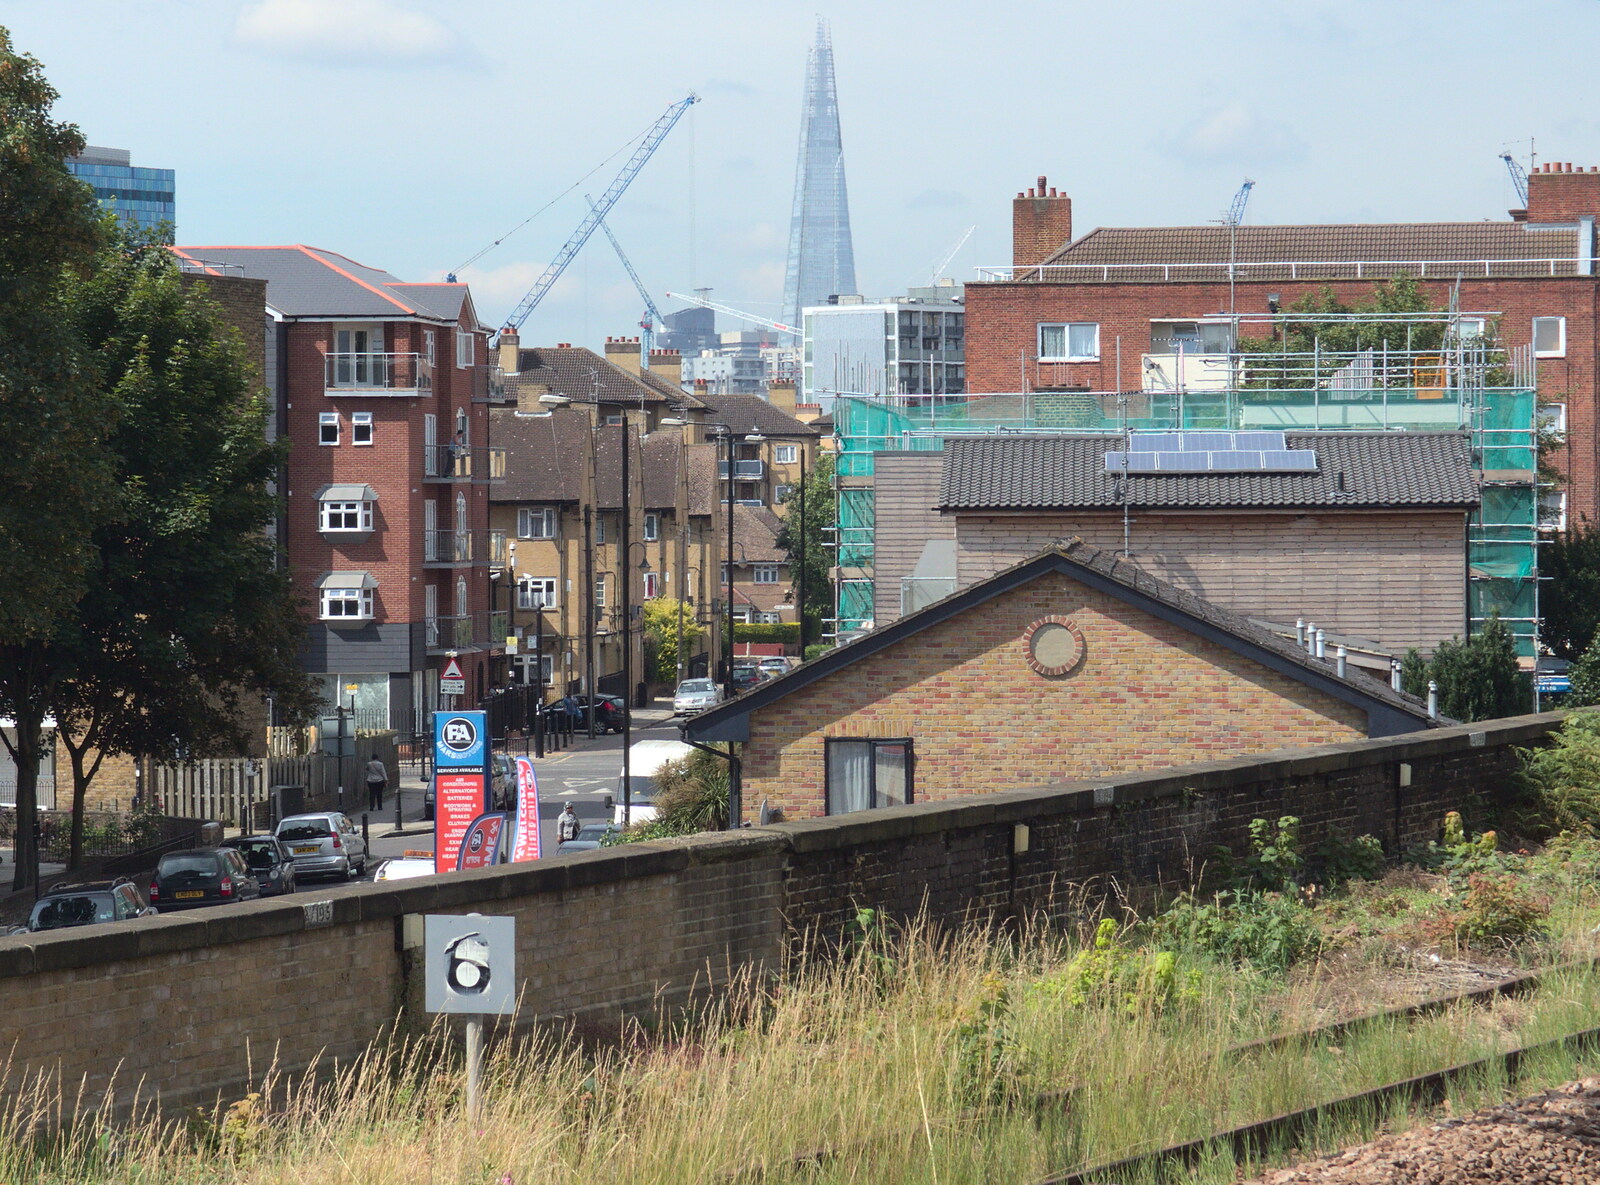 The Shard in the distance from A Trip to Pizza Pub, Great Suffolk Street, Southwark - 8th July 2014